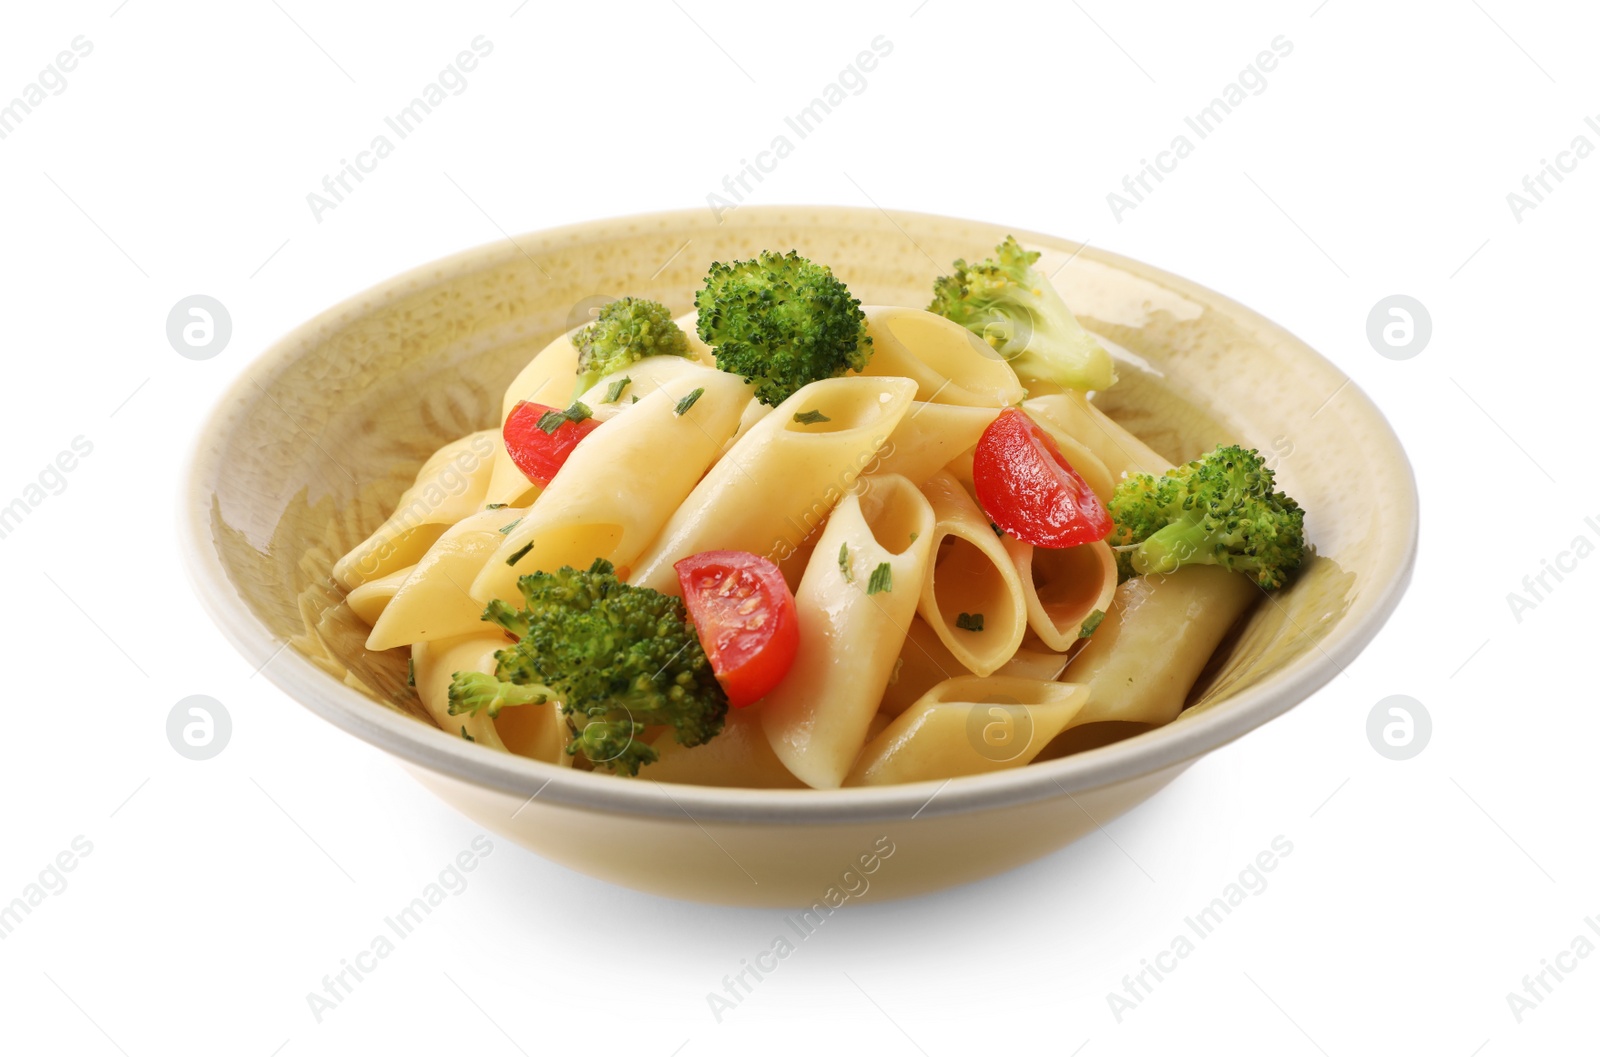 Photo of Tasty pasta with cherry tomatoes and broccoli isolated on white